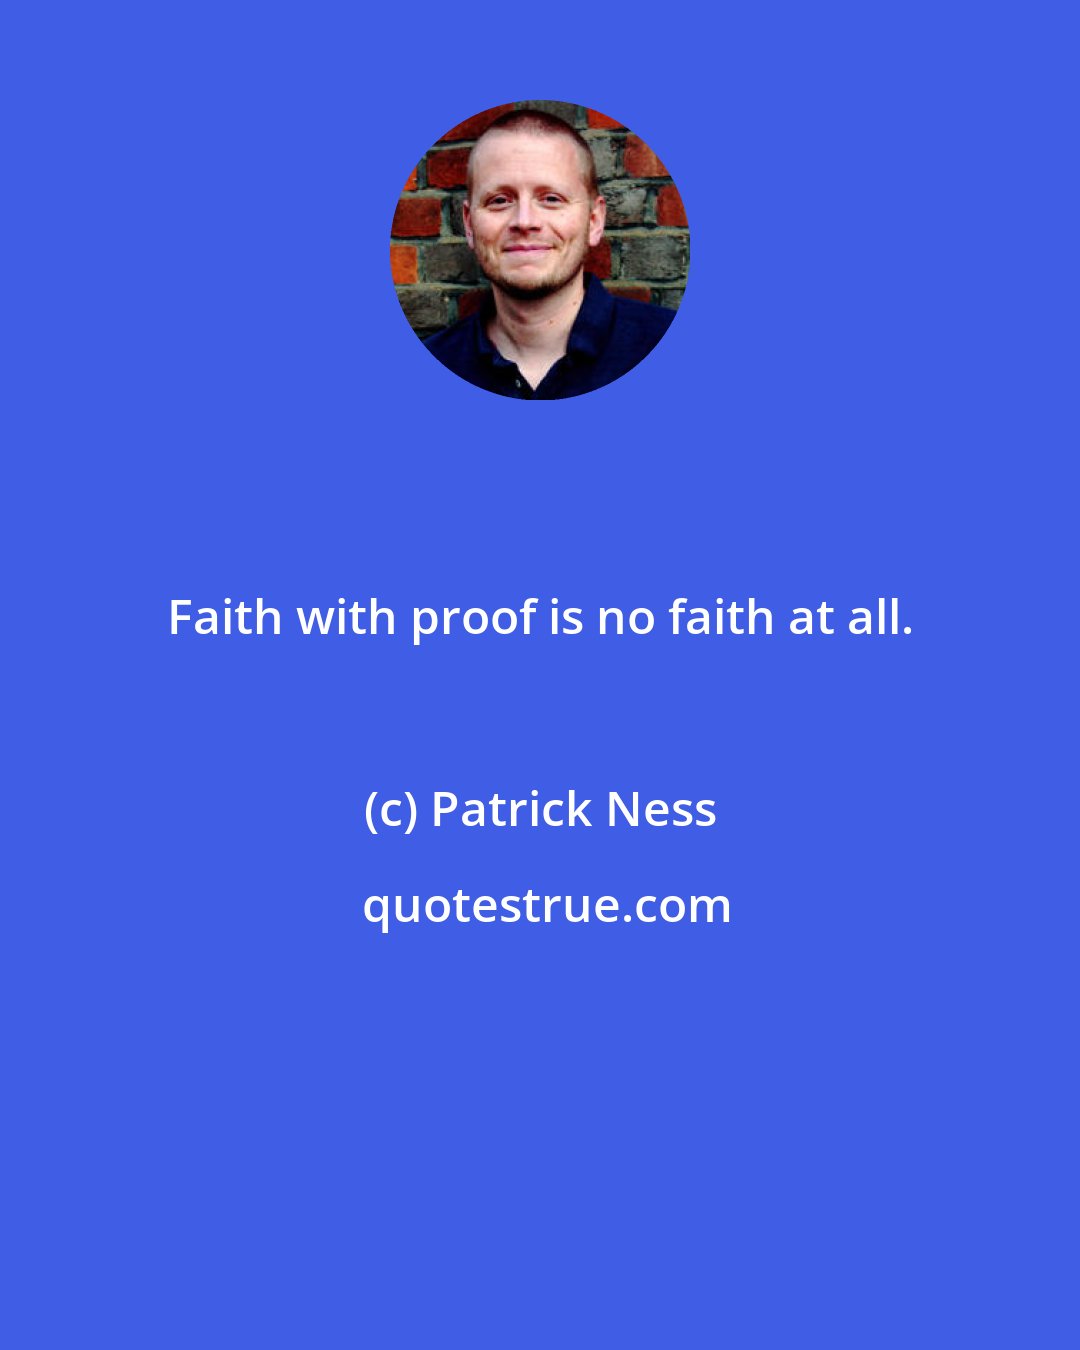 Patrick Ness: Faith with proof is no faith at all.